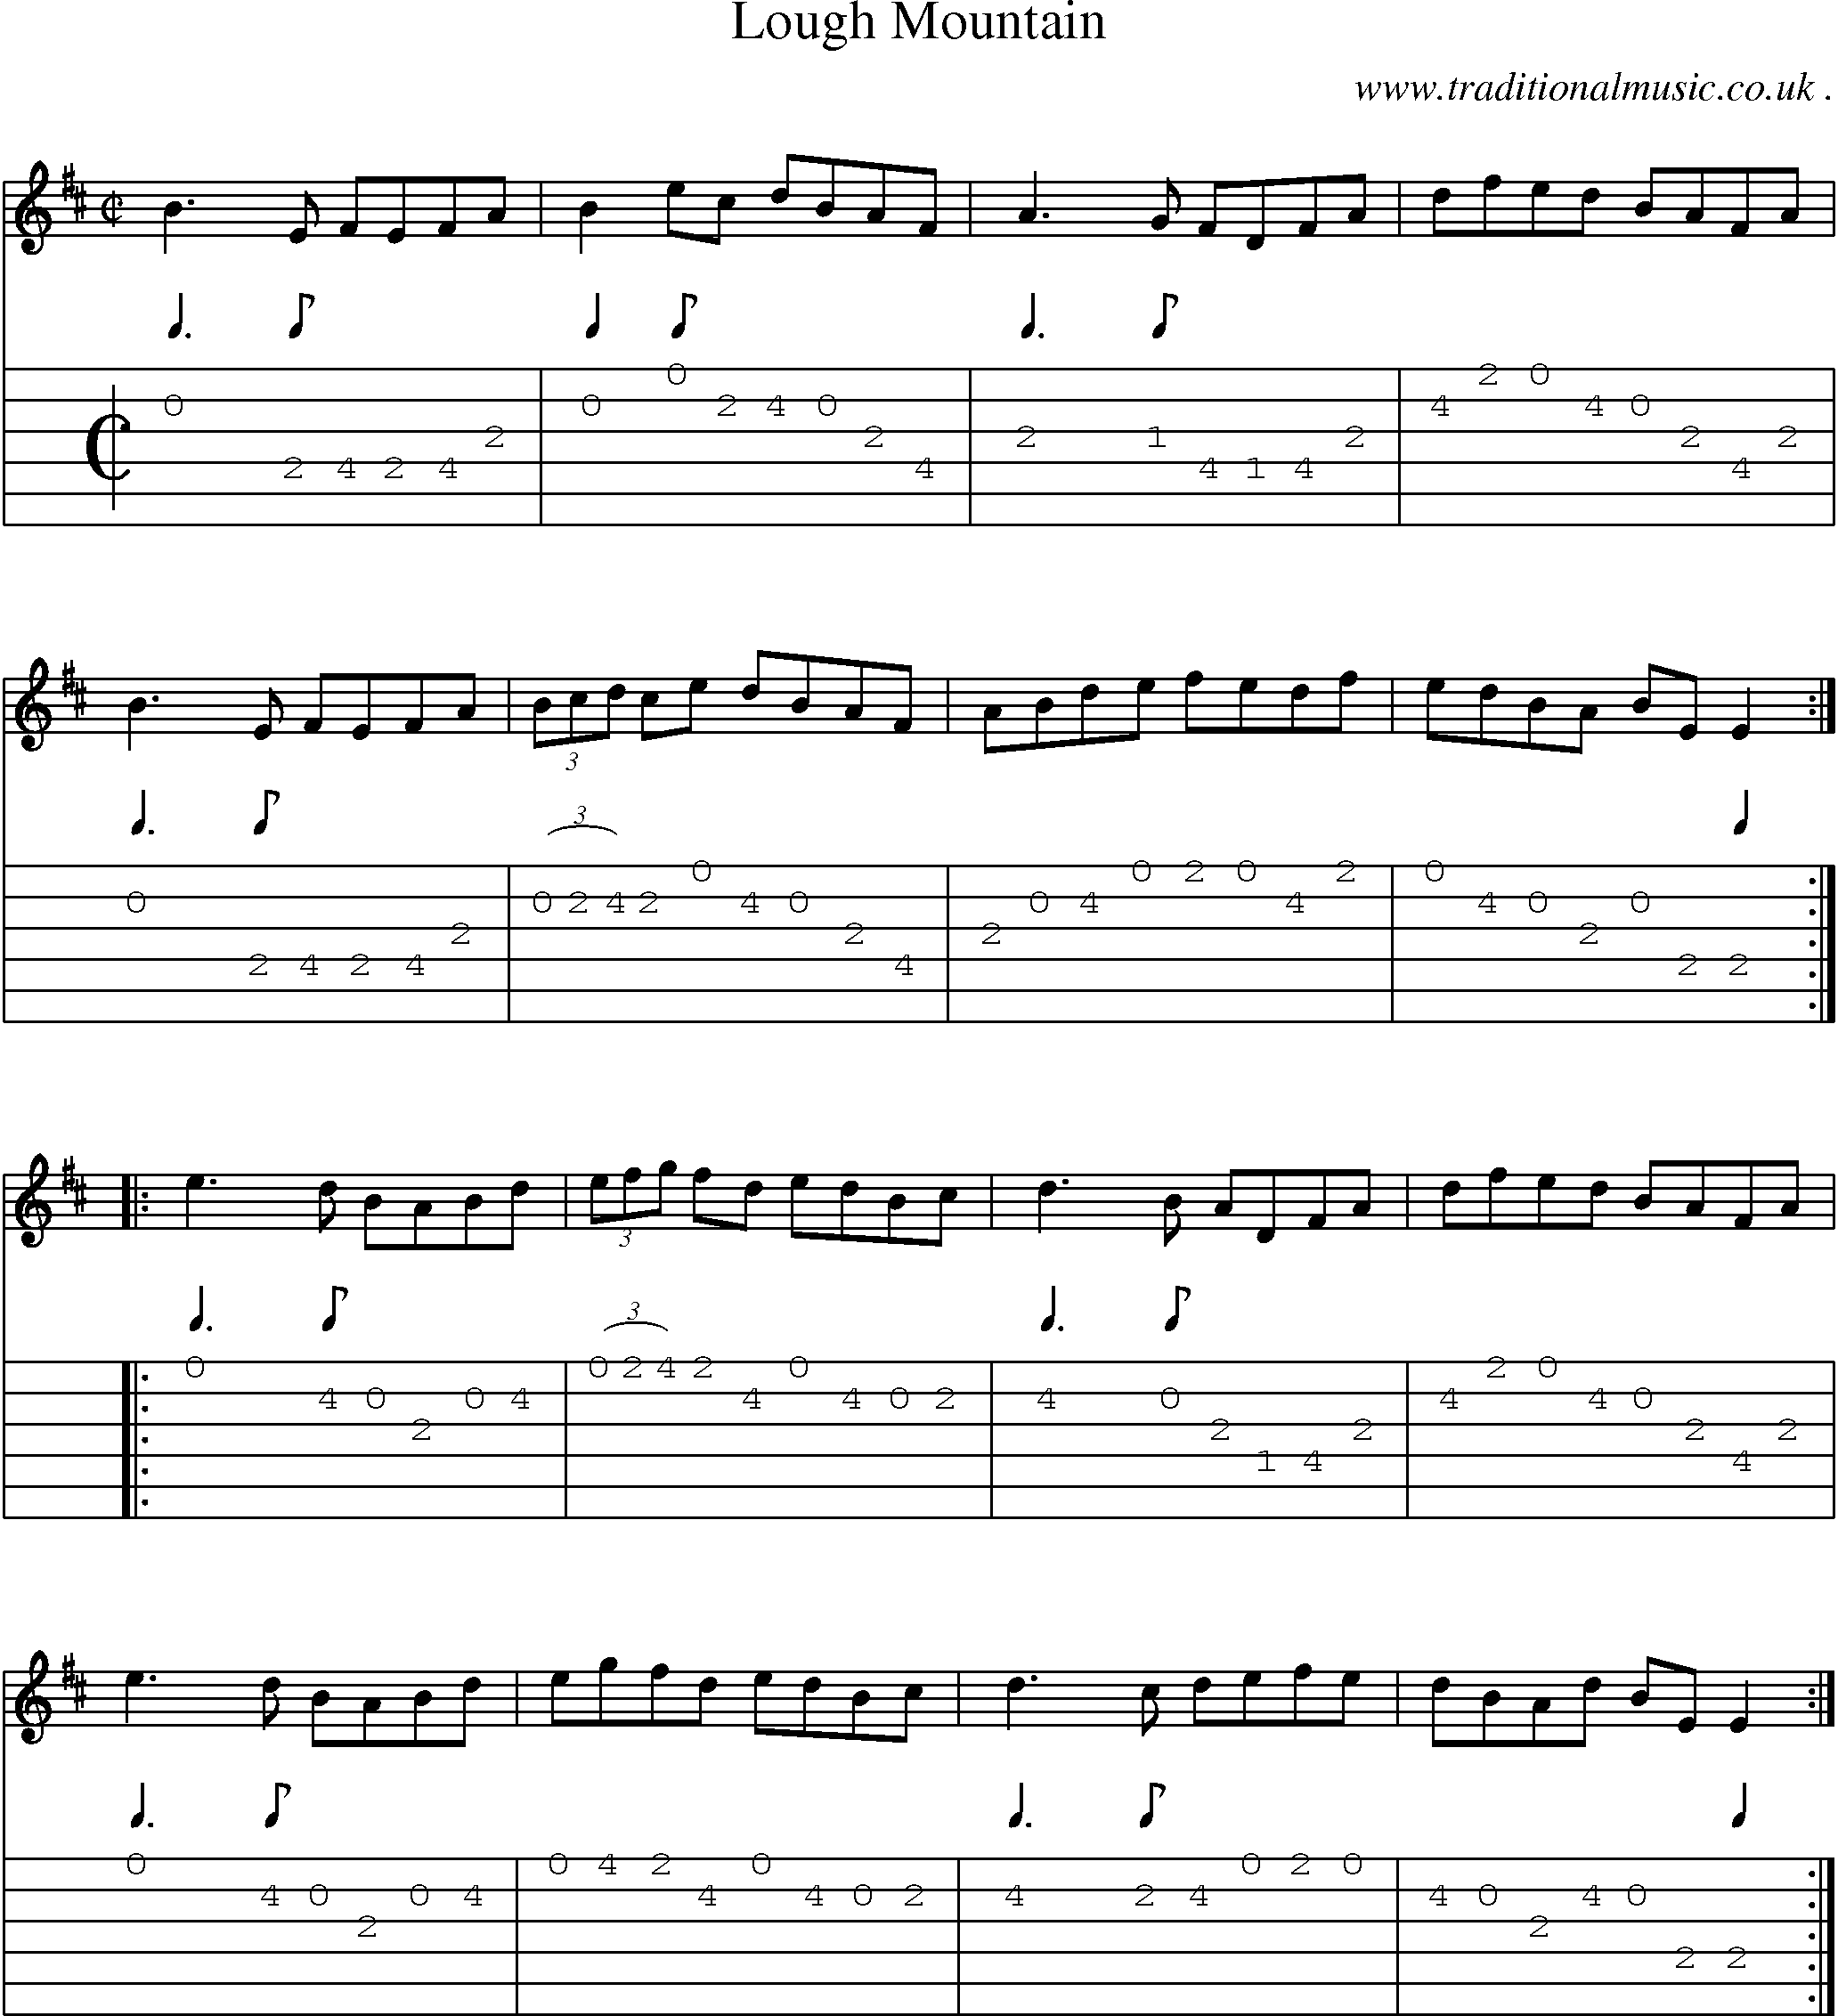 Sheet-Music and Guitar Tabs for Lough Mountain